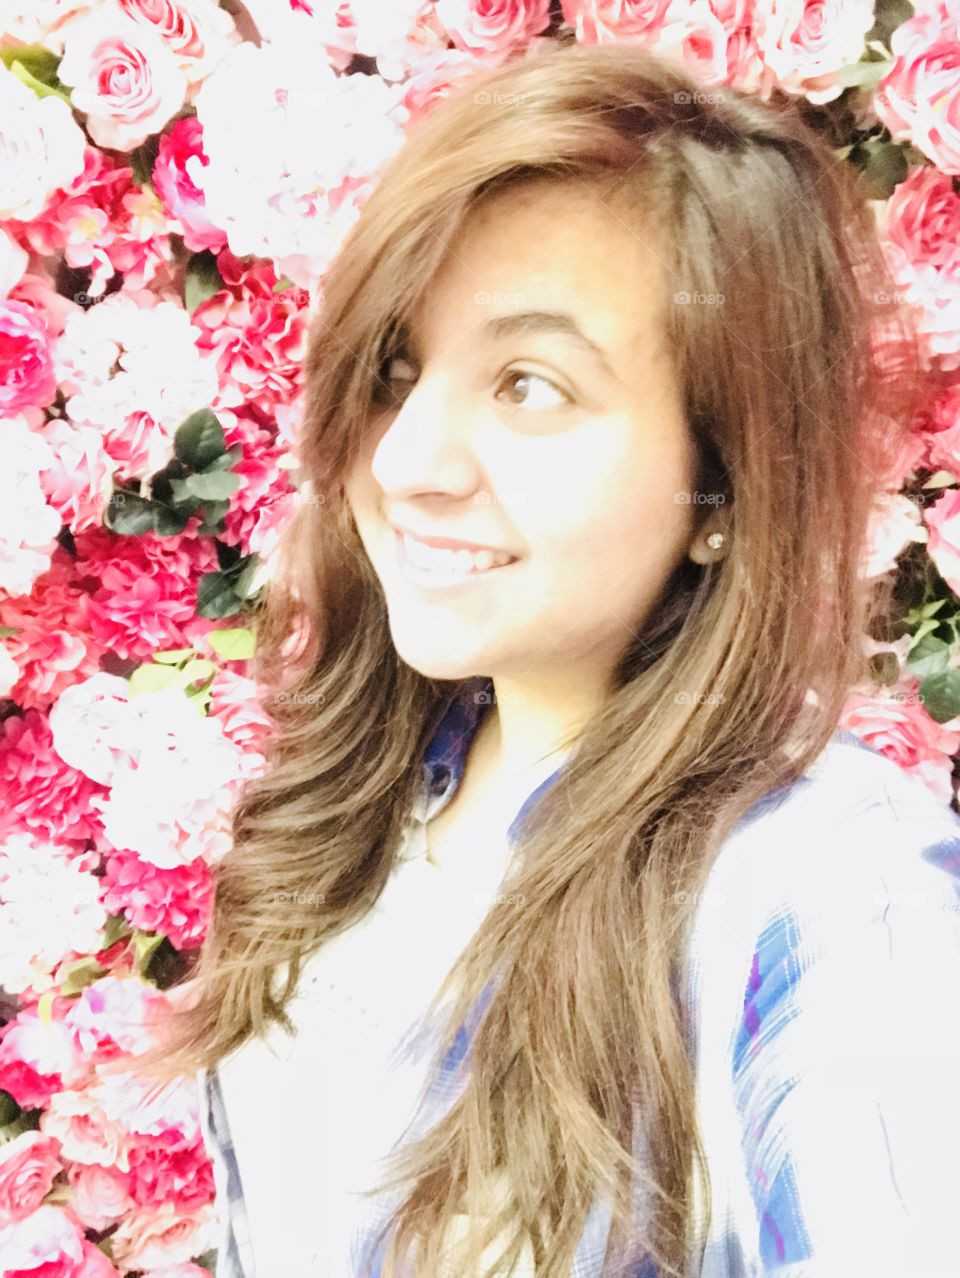 Selfie with pink background flower rose wall!